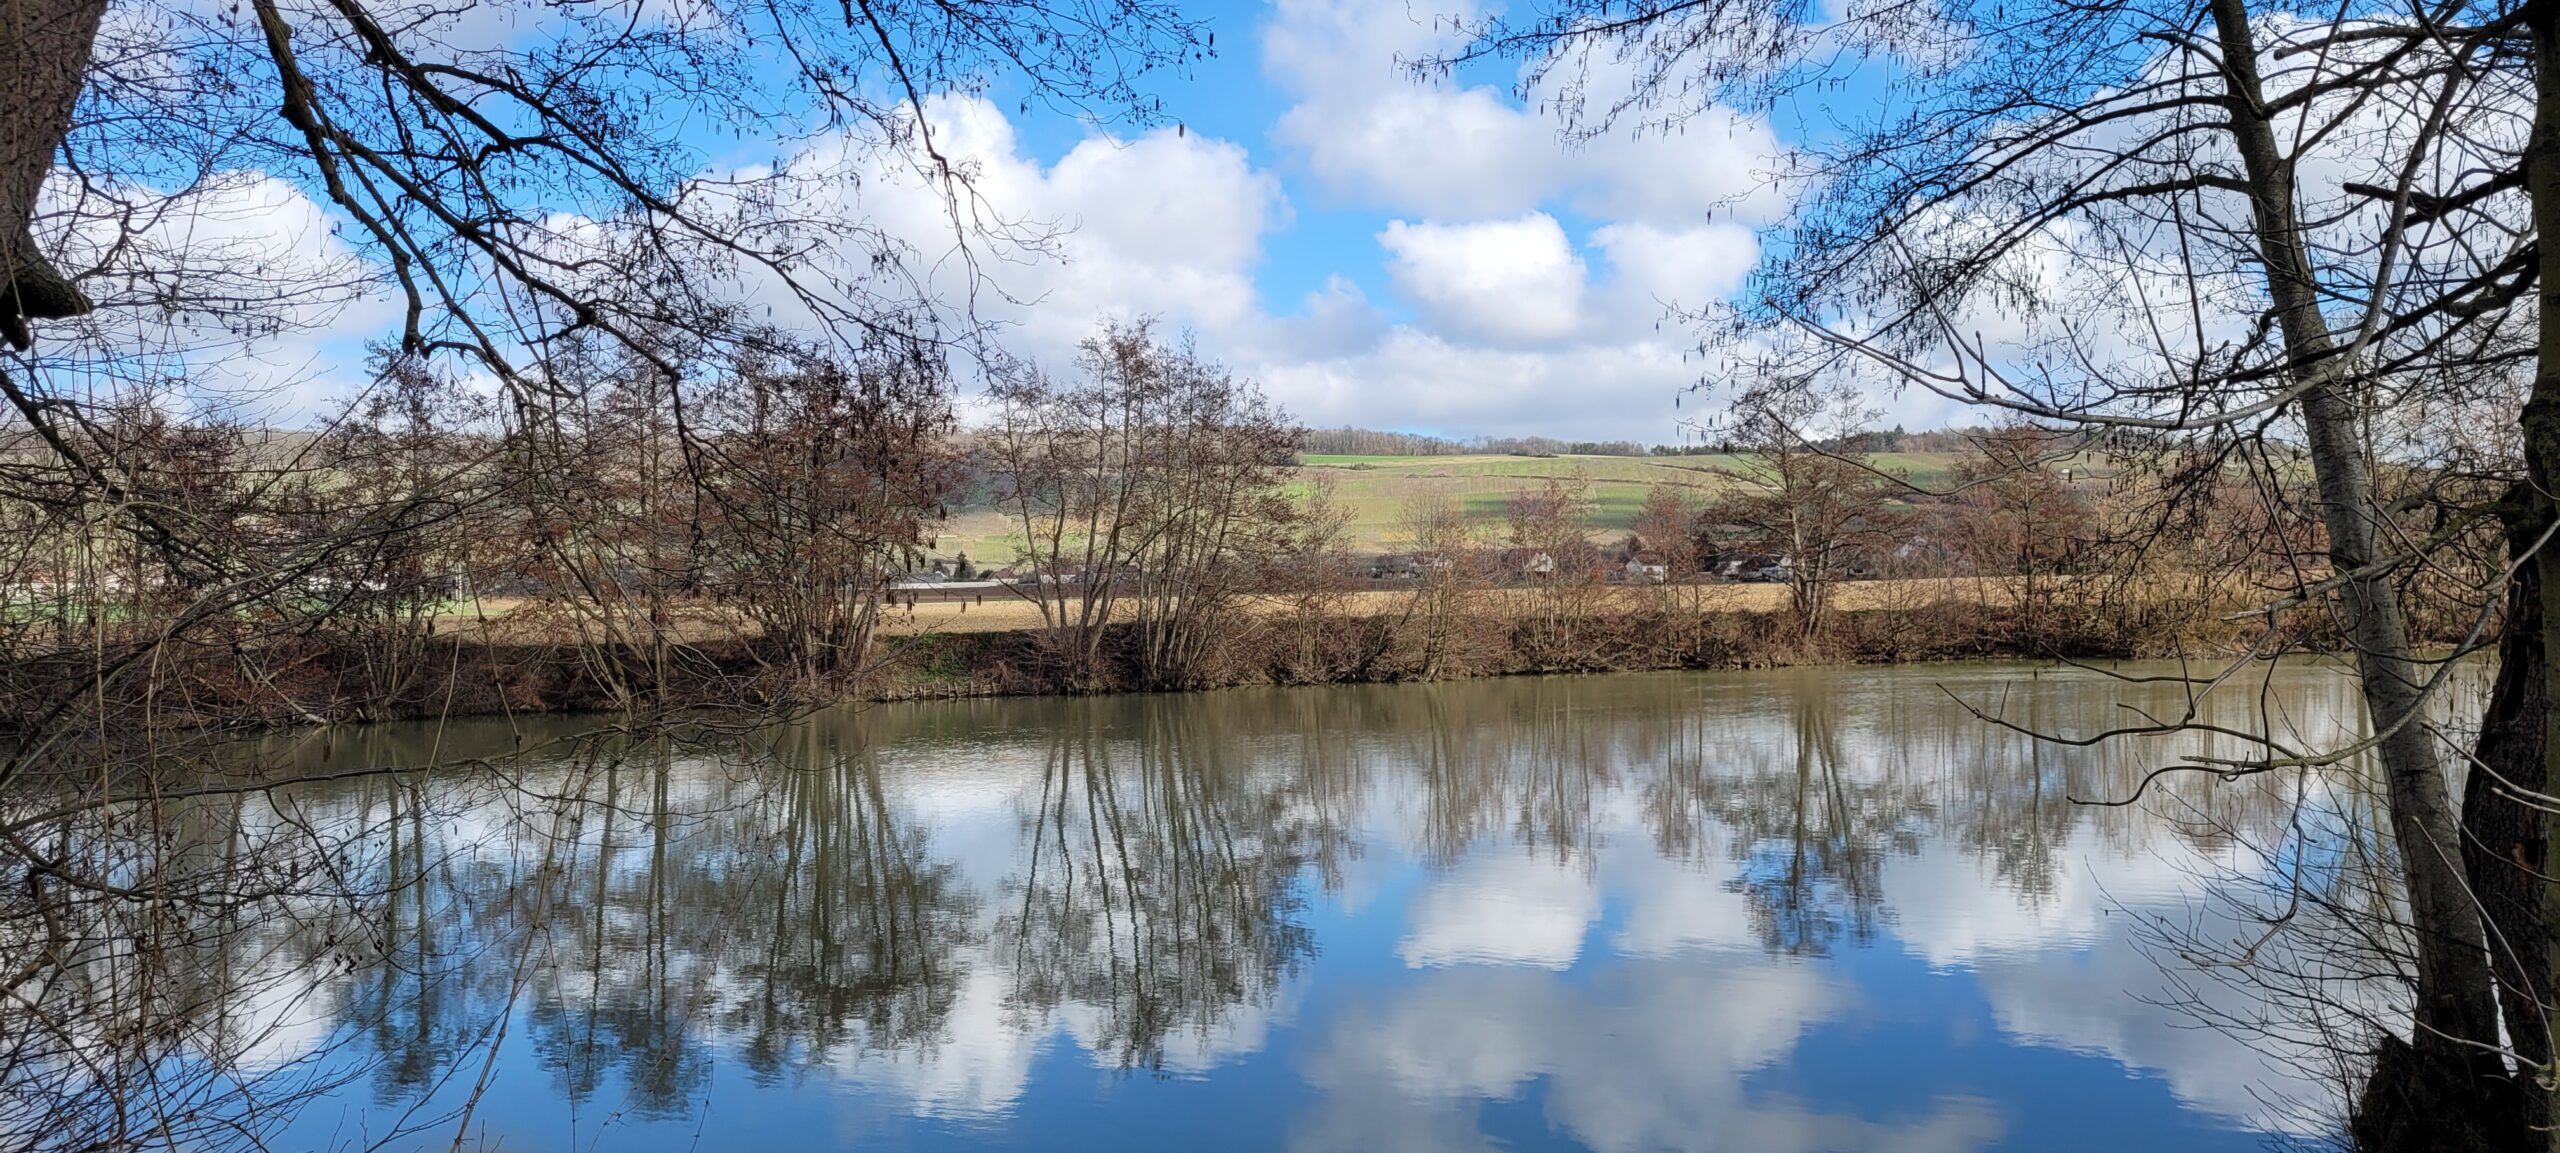 blue sky with puffy white clouds over a river reflecting